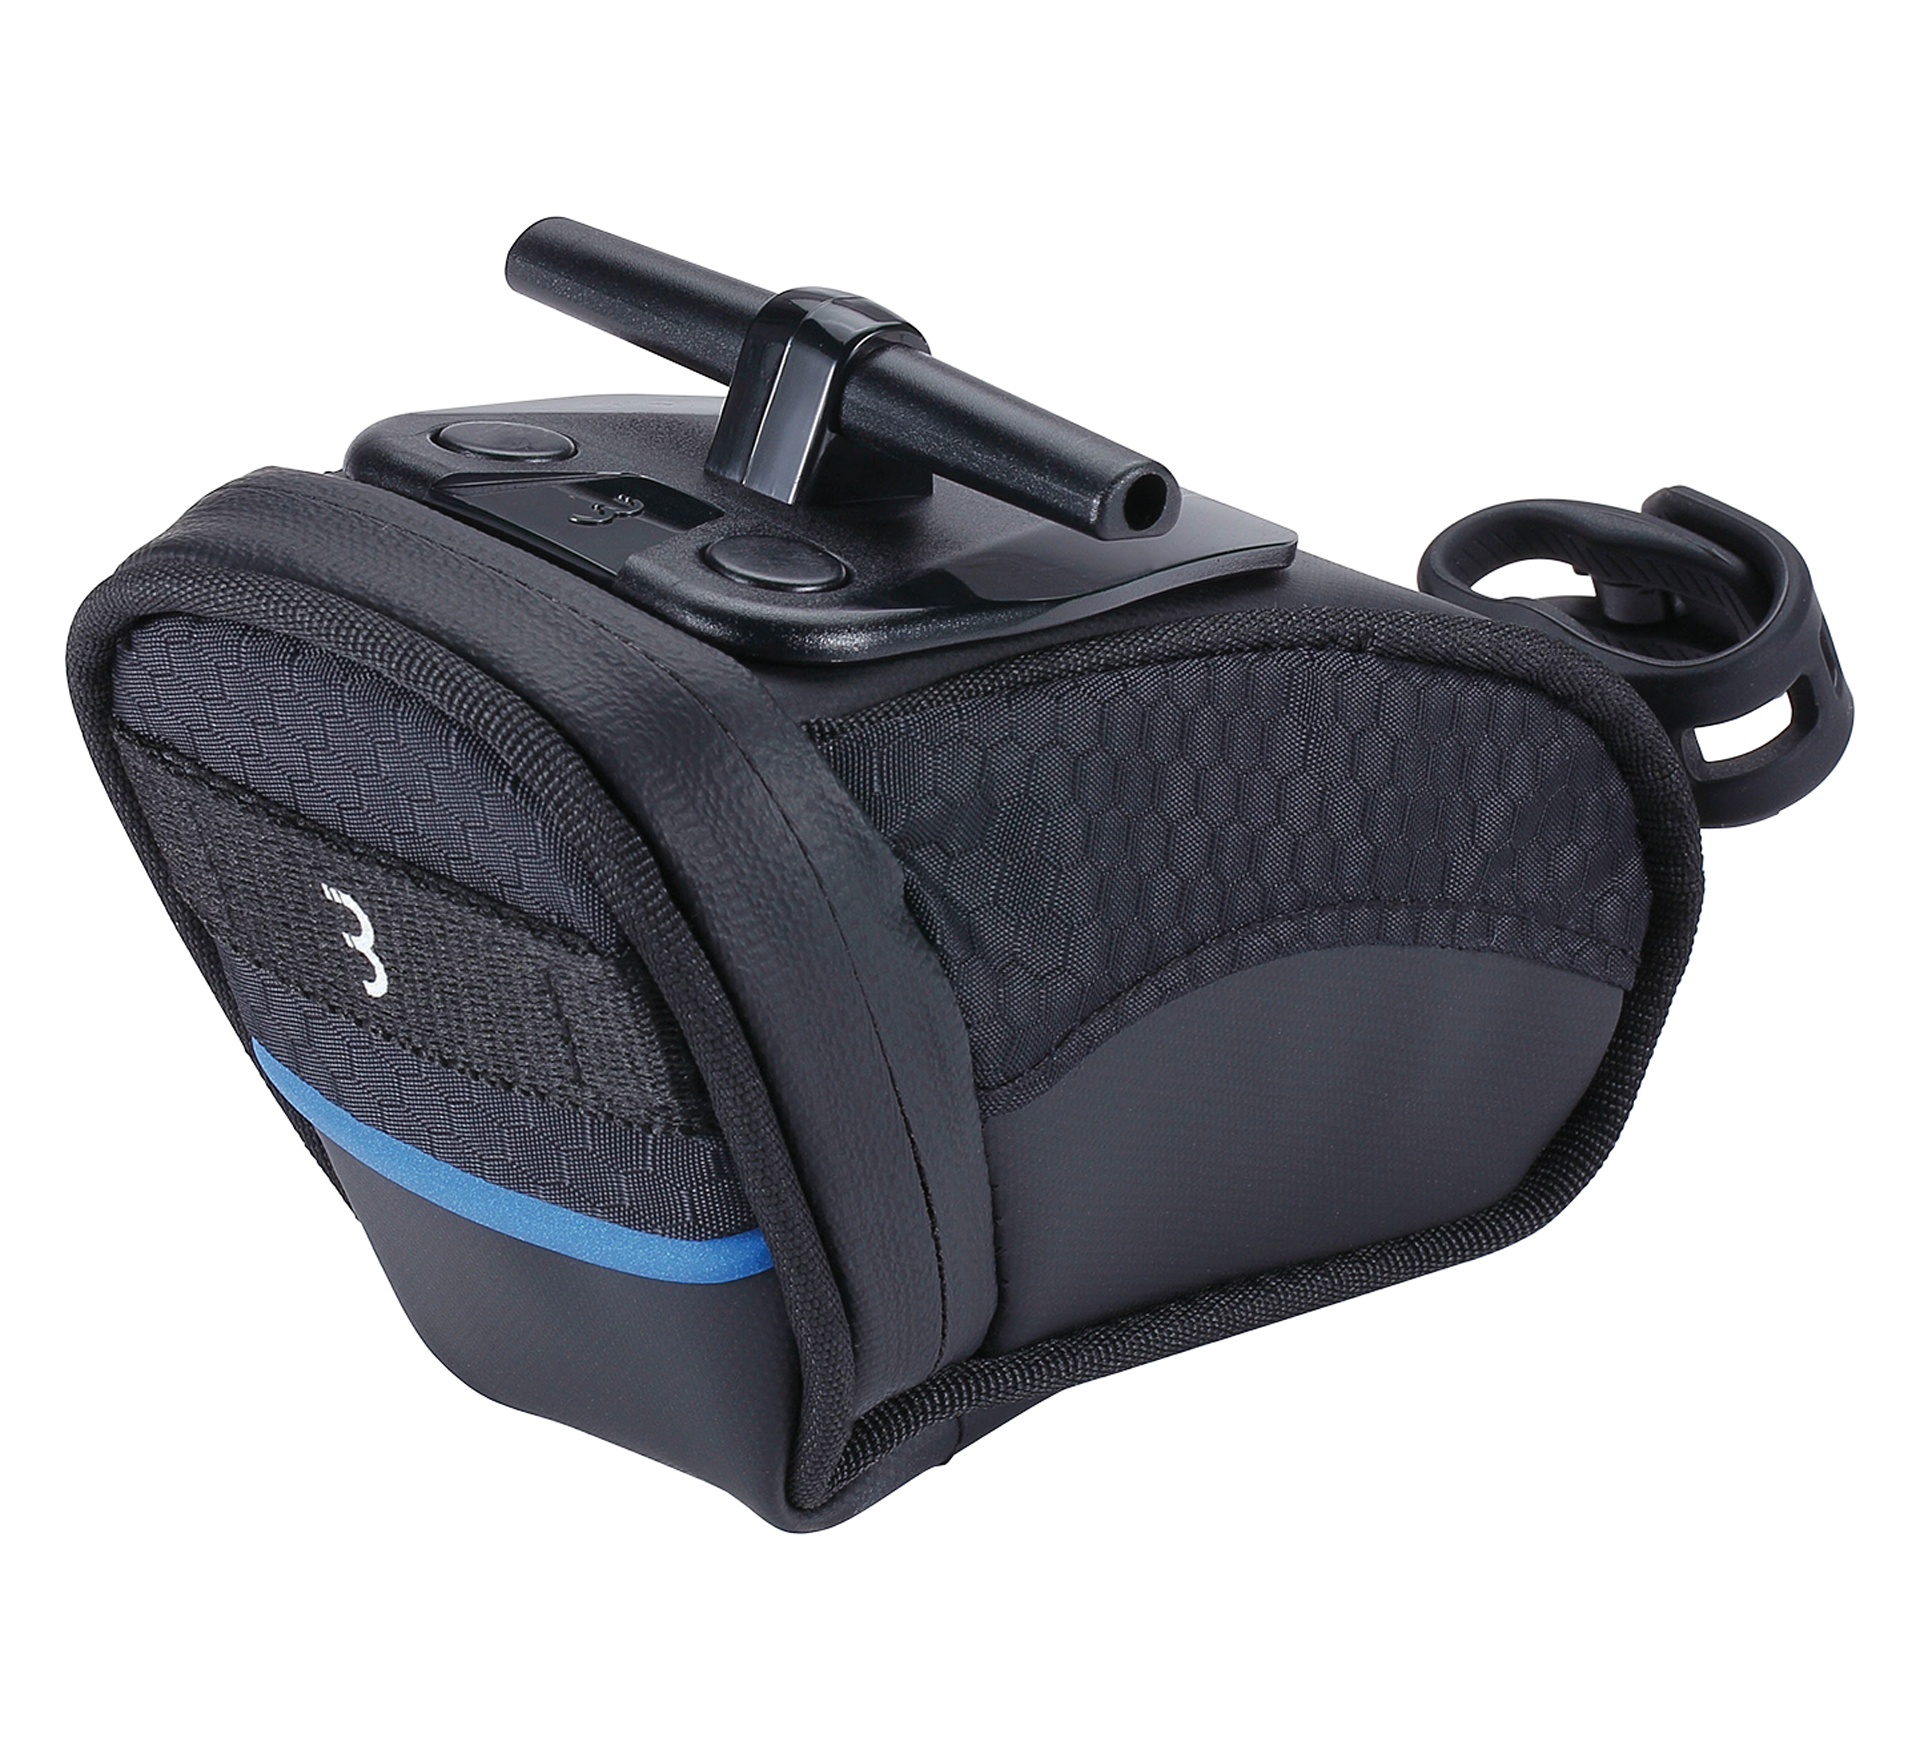 BBB Cycling CurvePack S